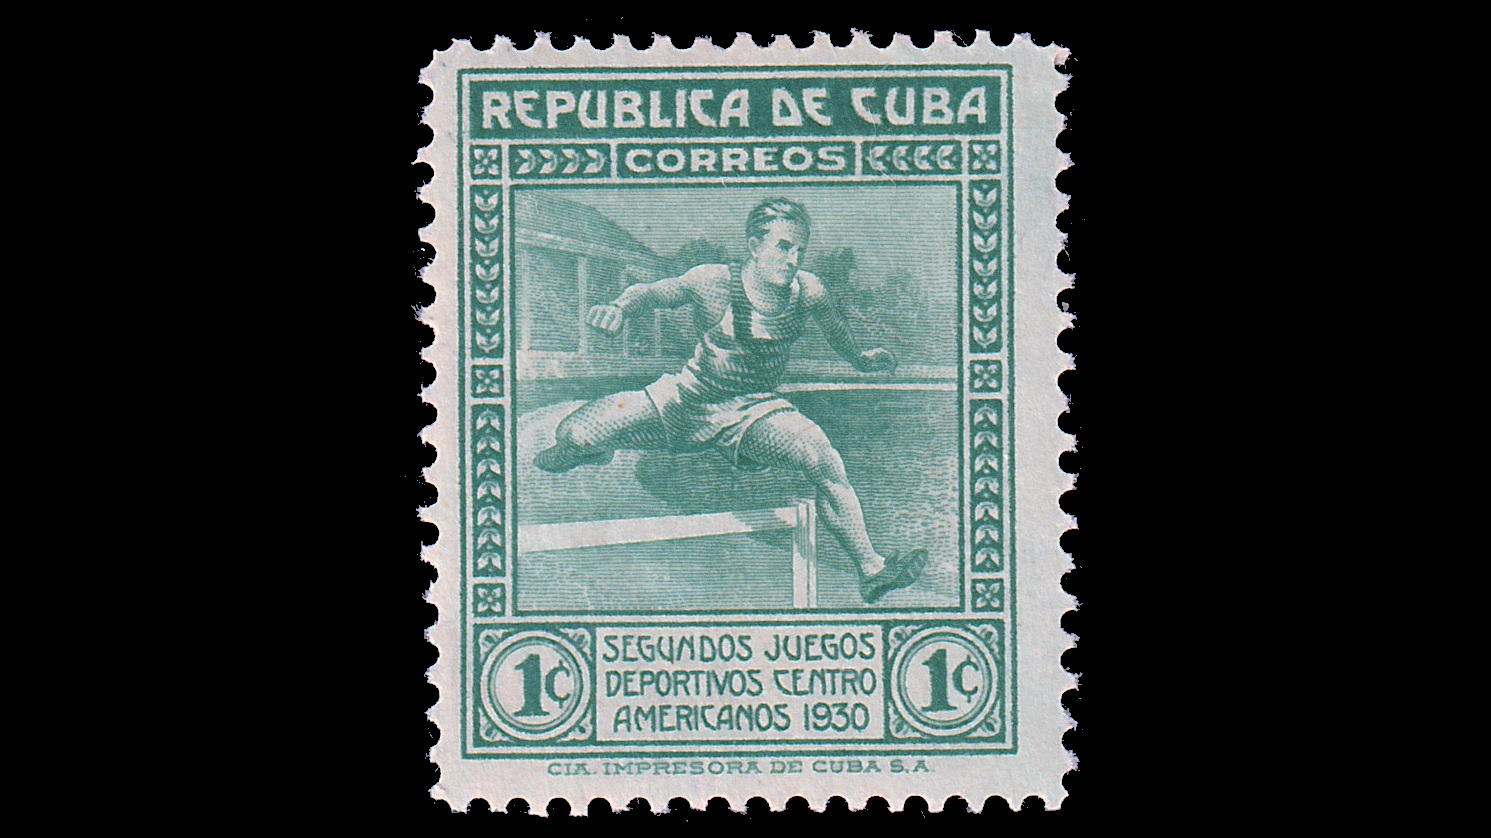 1930 Central American and Caribbean Games, Havana